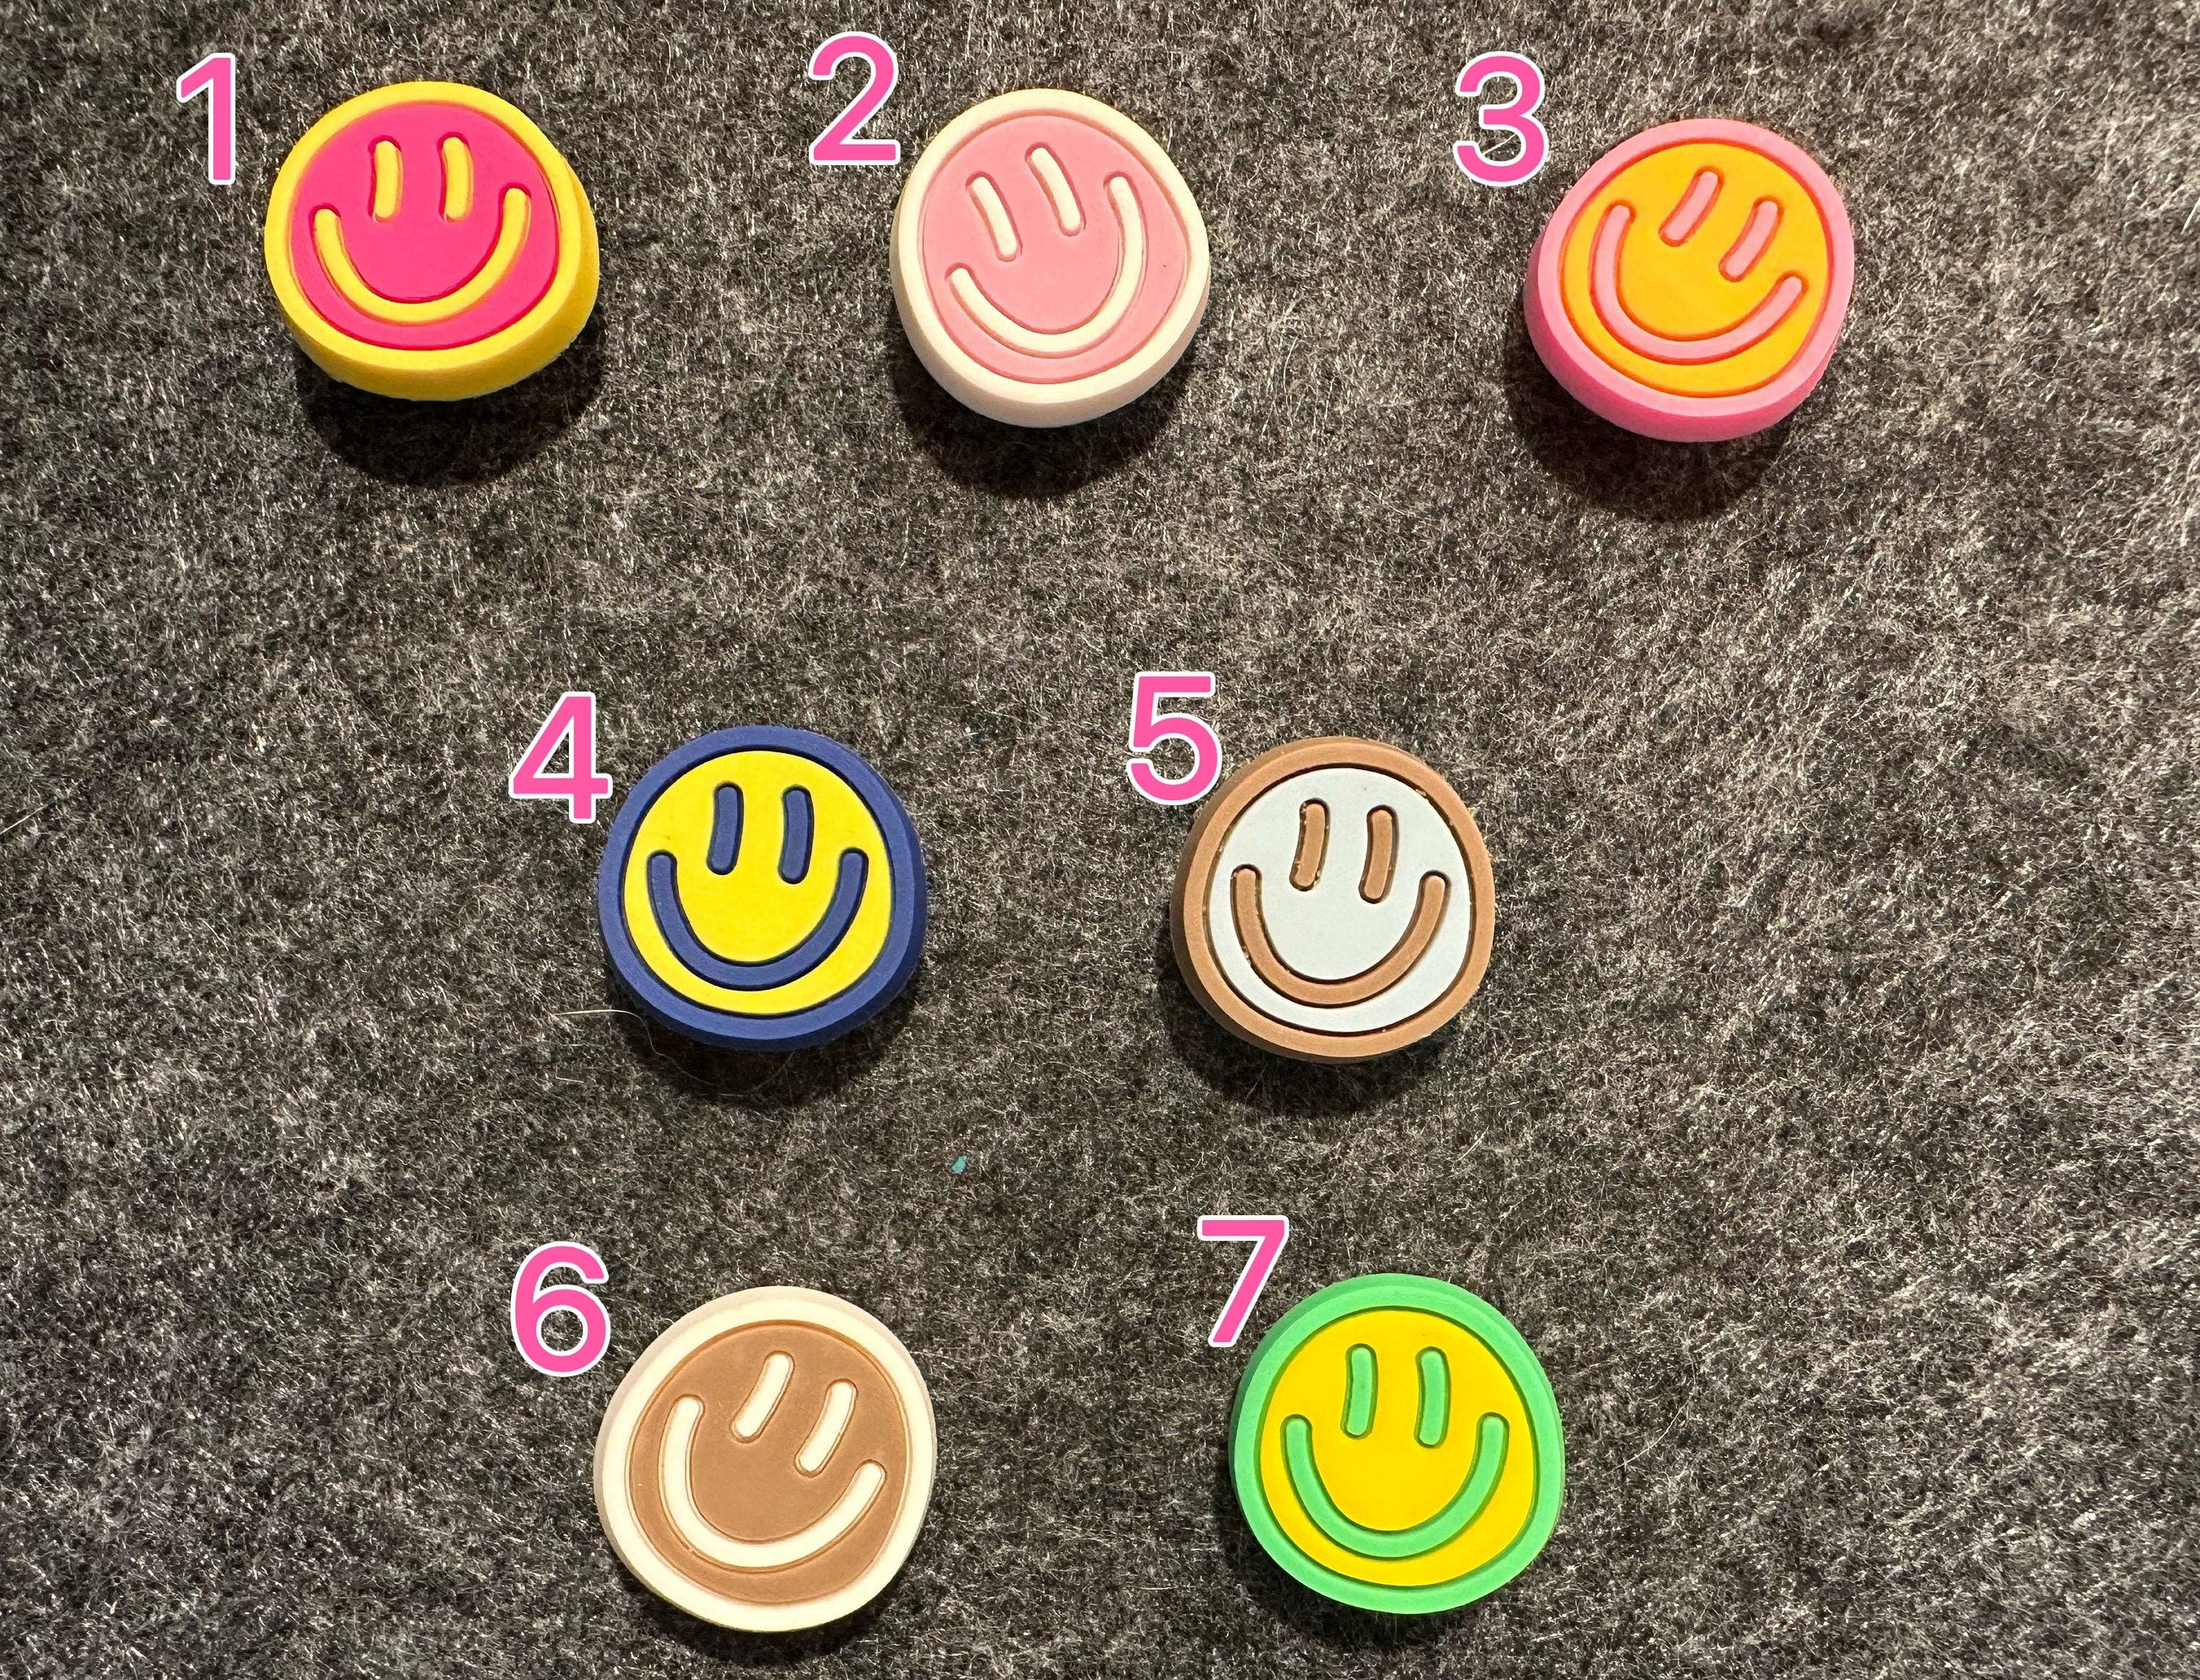 Pick your own Colorful Smile Face UPUPUP Design Theme Shoe Charms Best Quality JuliesDecalDesign